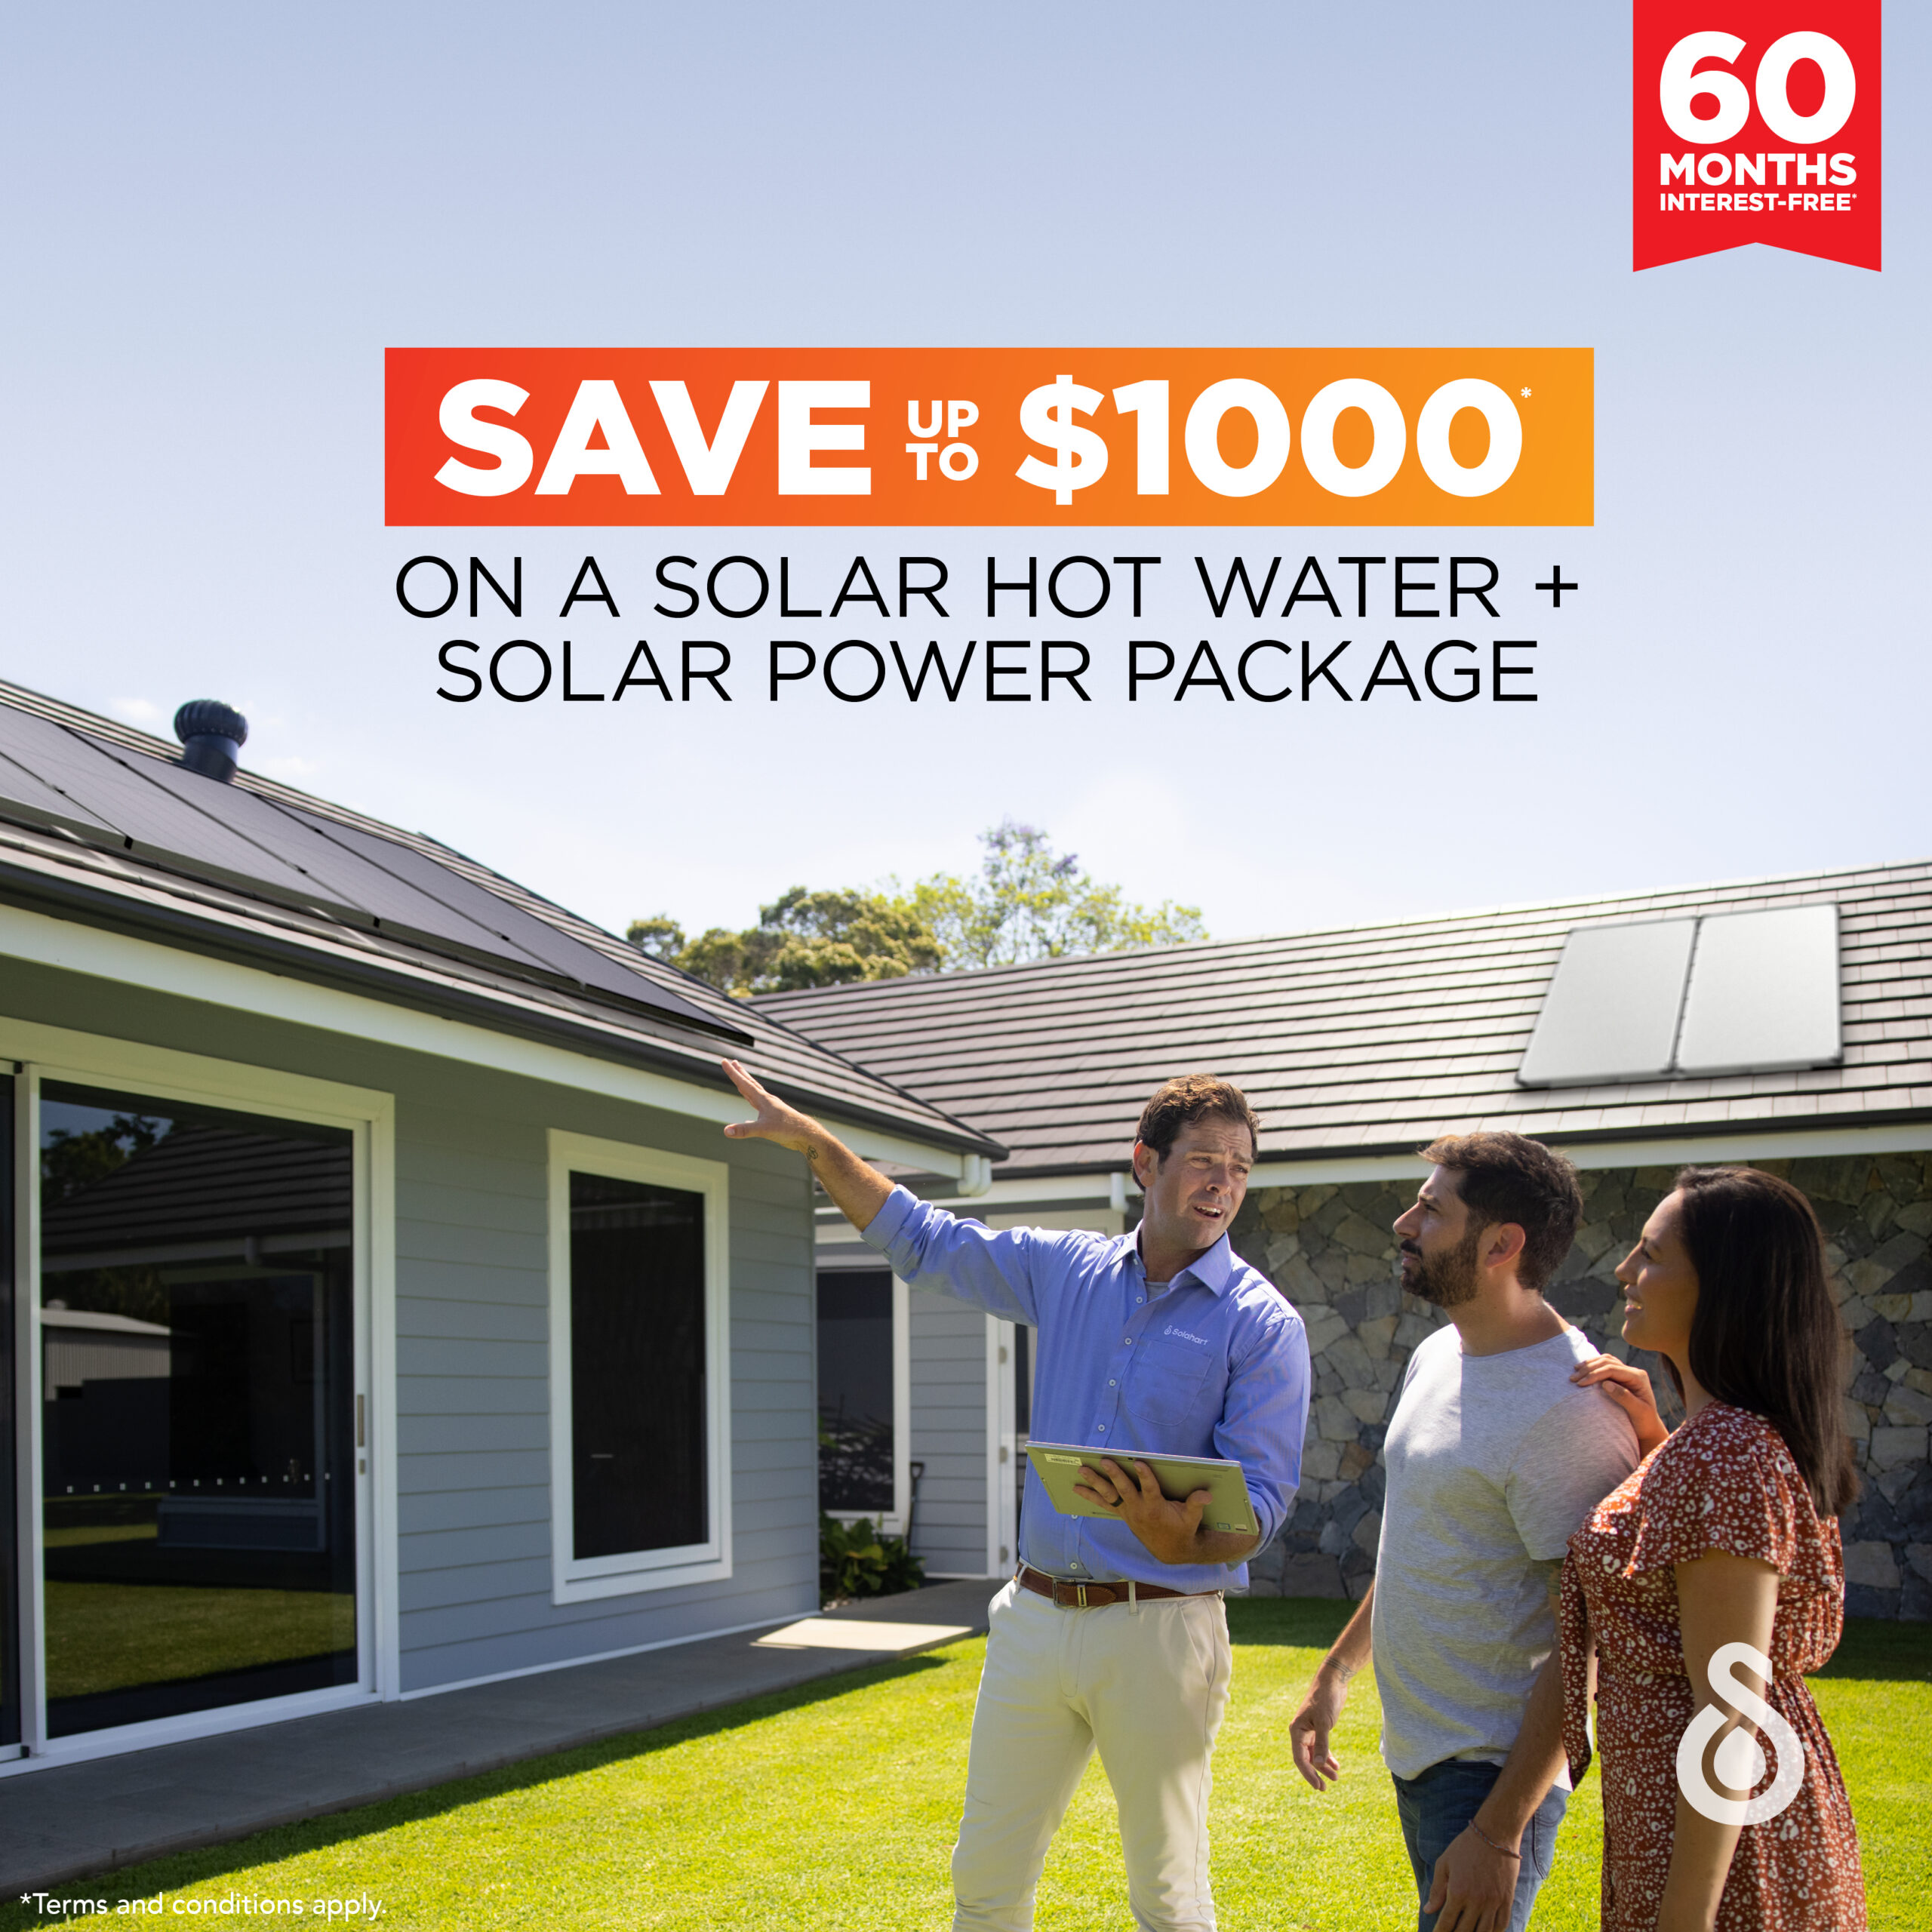 Save up to $1000 on a solar hot water solar power package